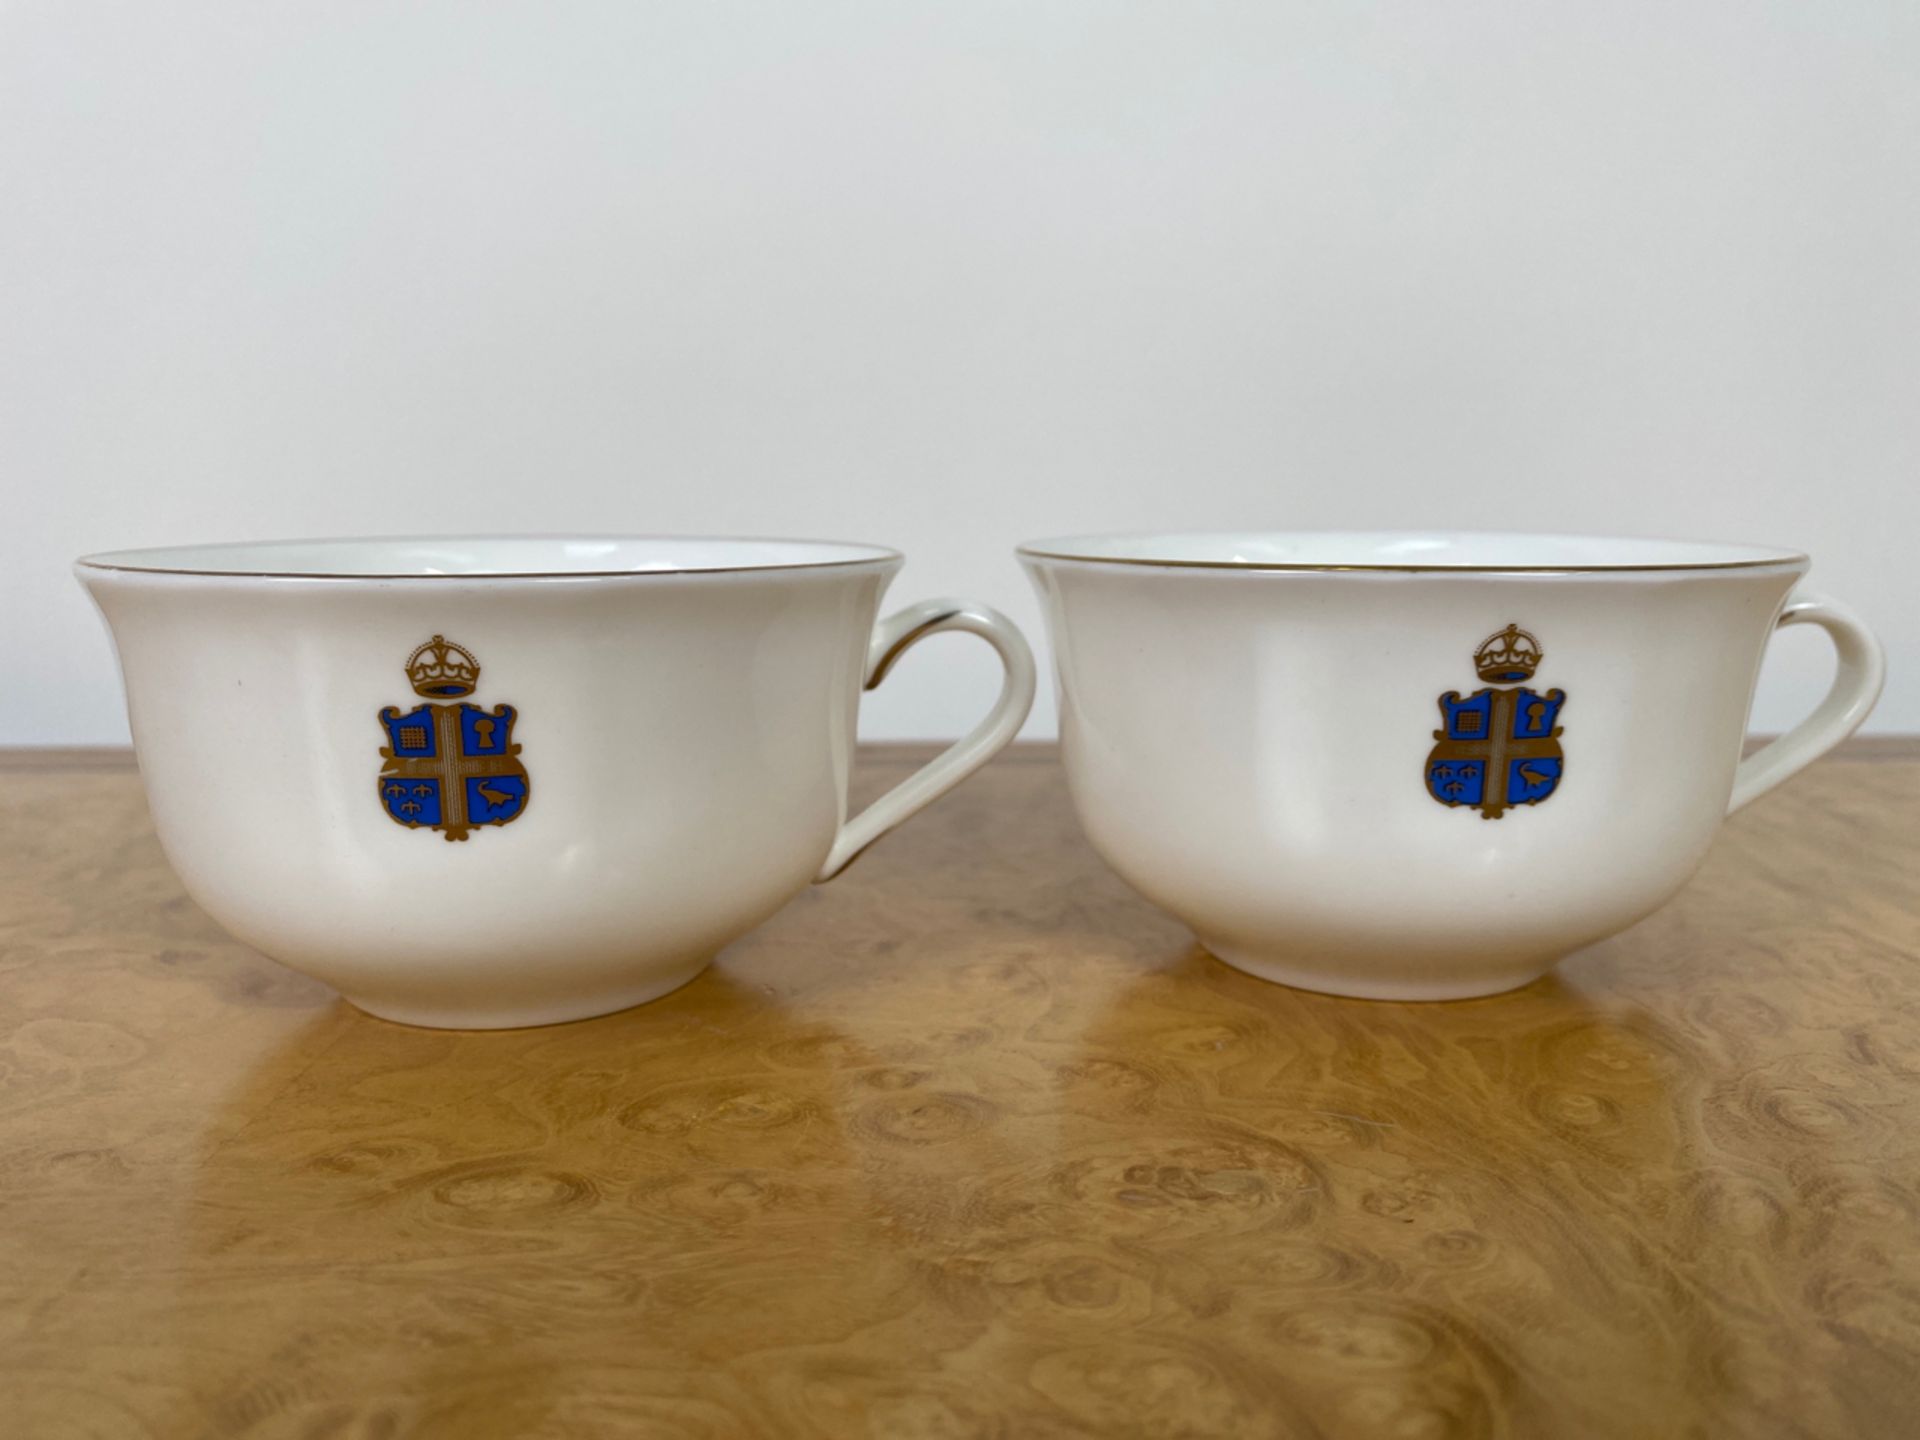 Set of Crested Crockery for Claridge's by Chommette 1884 - Image 13 of 37